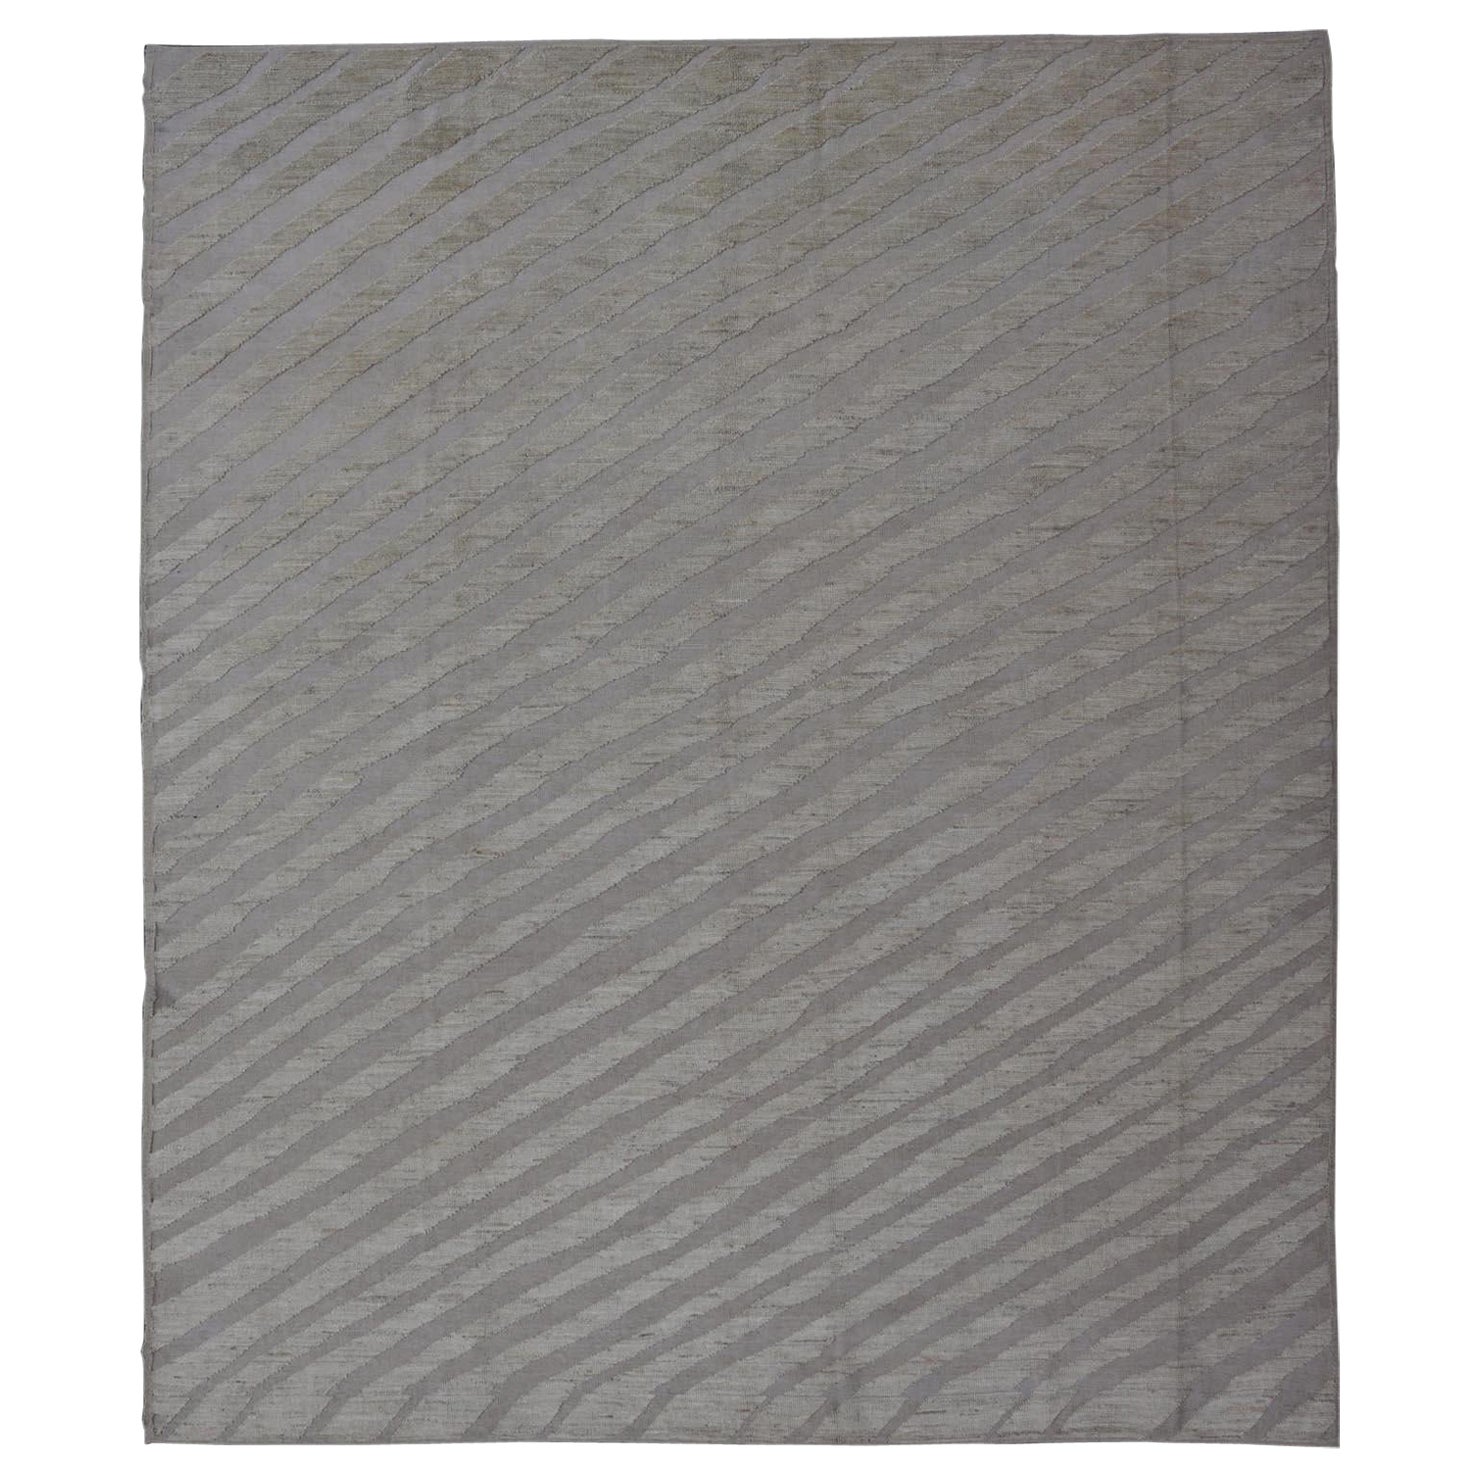 Modern Rug in Wool with Sub-Geometric Slanted Linear Design in Cream and Taupe